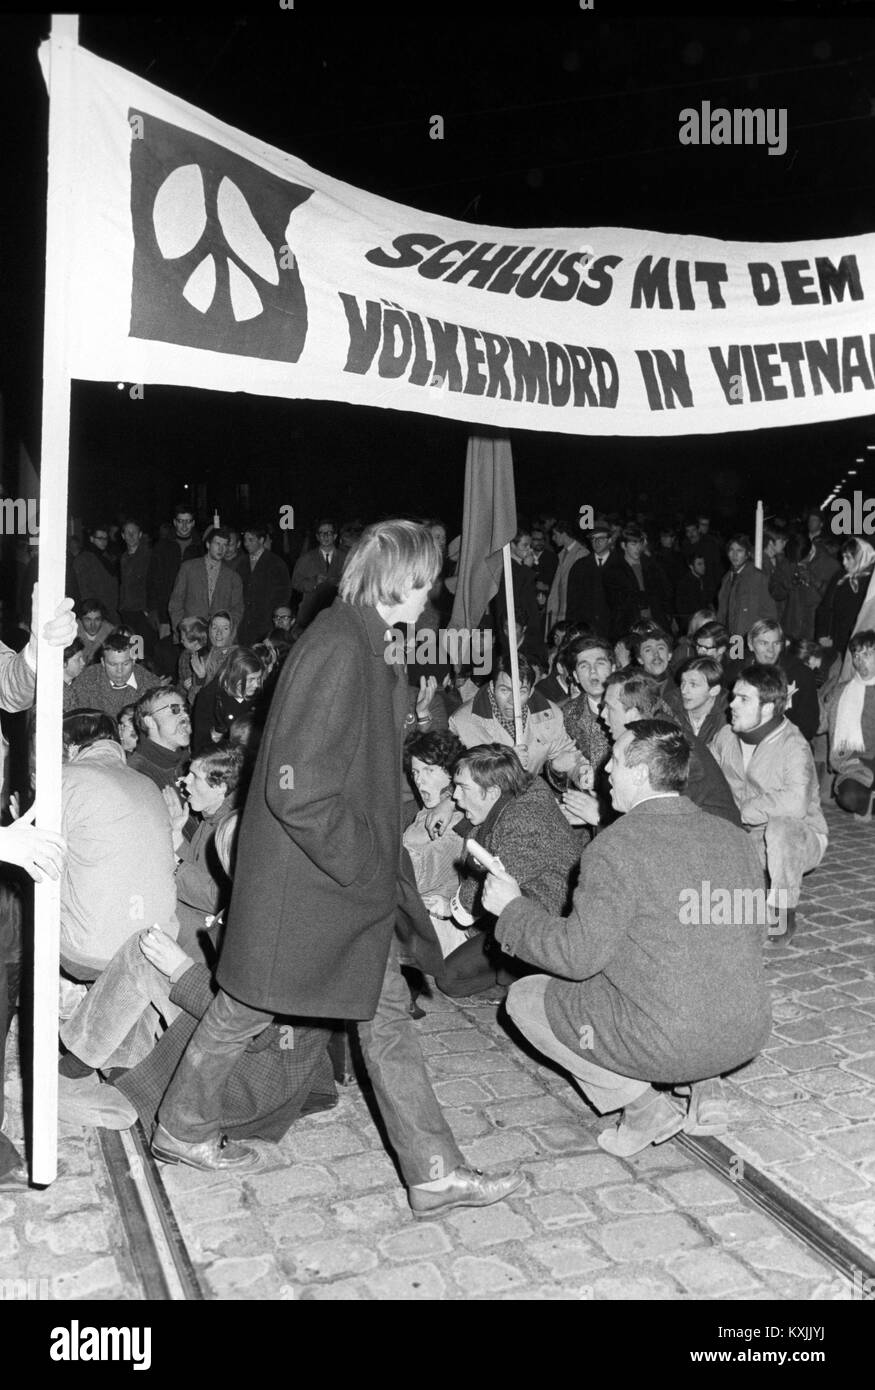 About 2,500 people demonstrate against Vietnam War in Munich on 15 March 1968. | usage worldwide Stock Photo